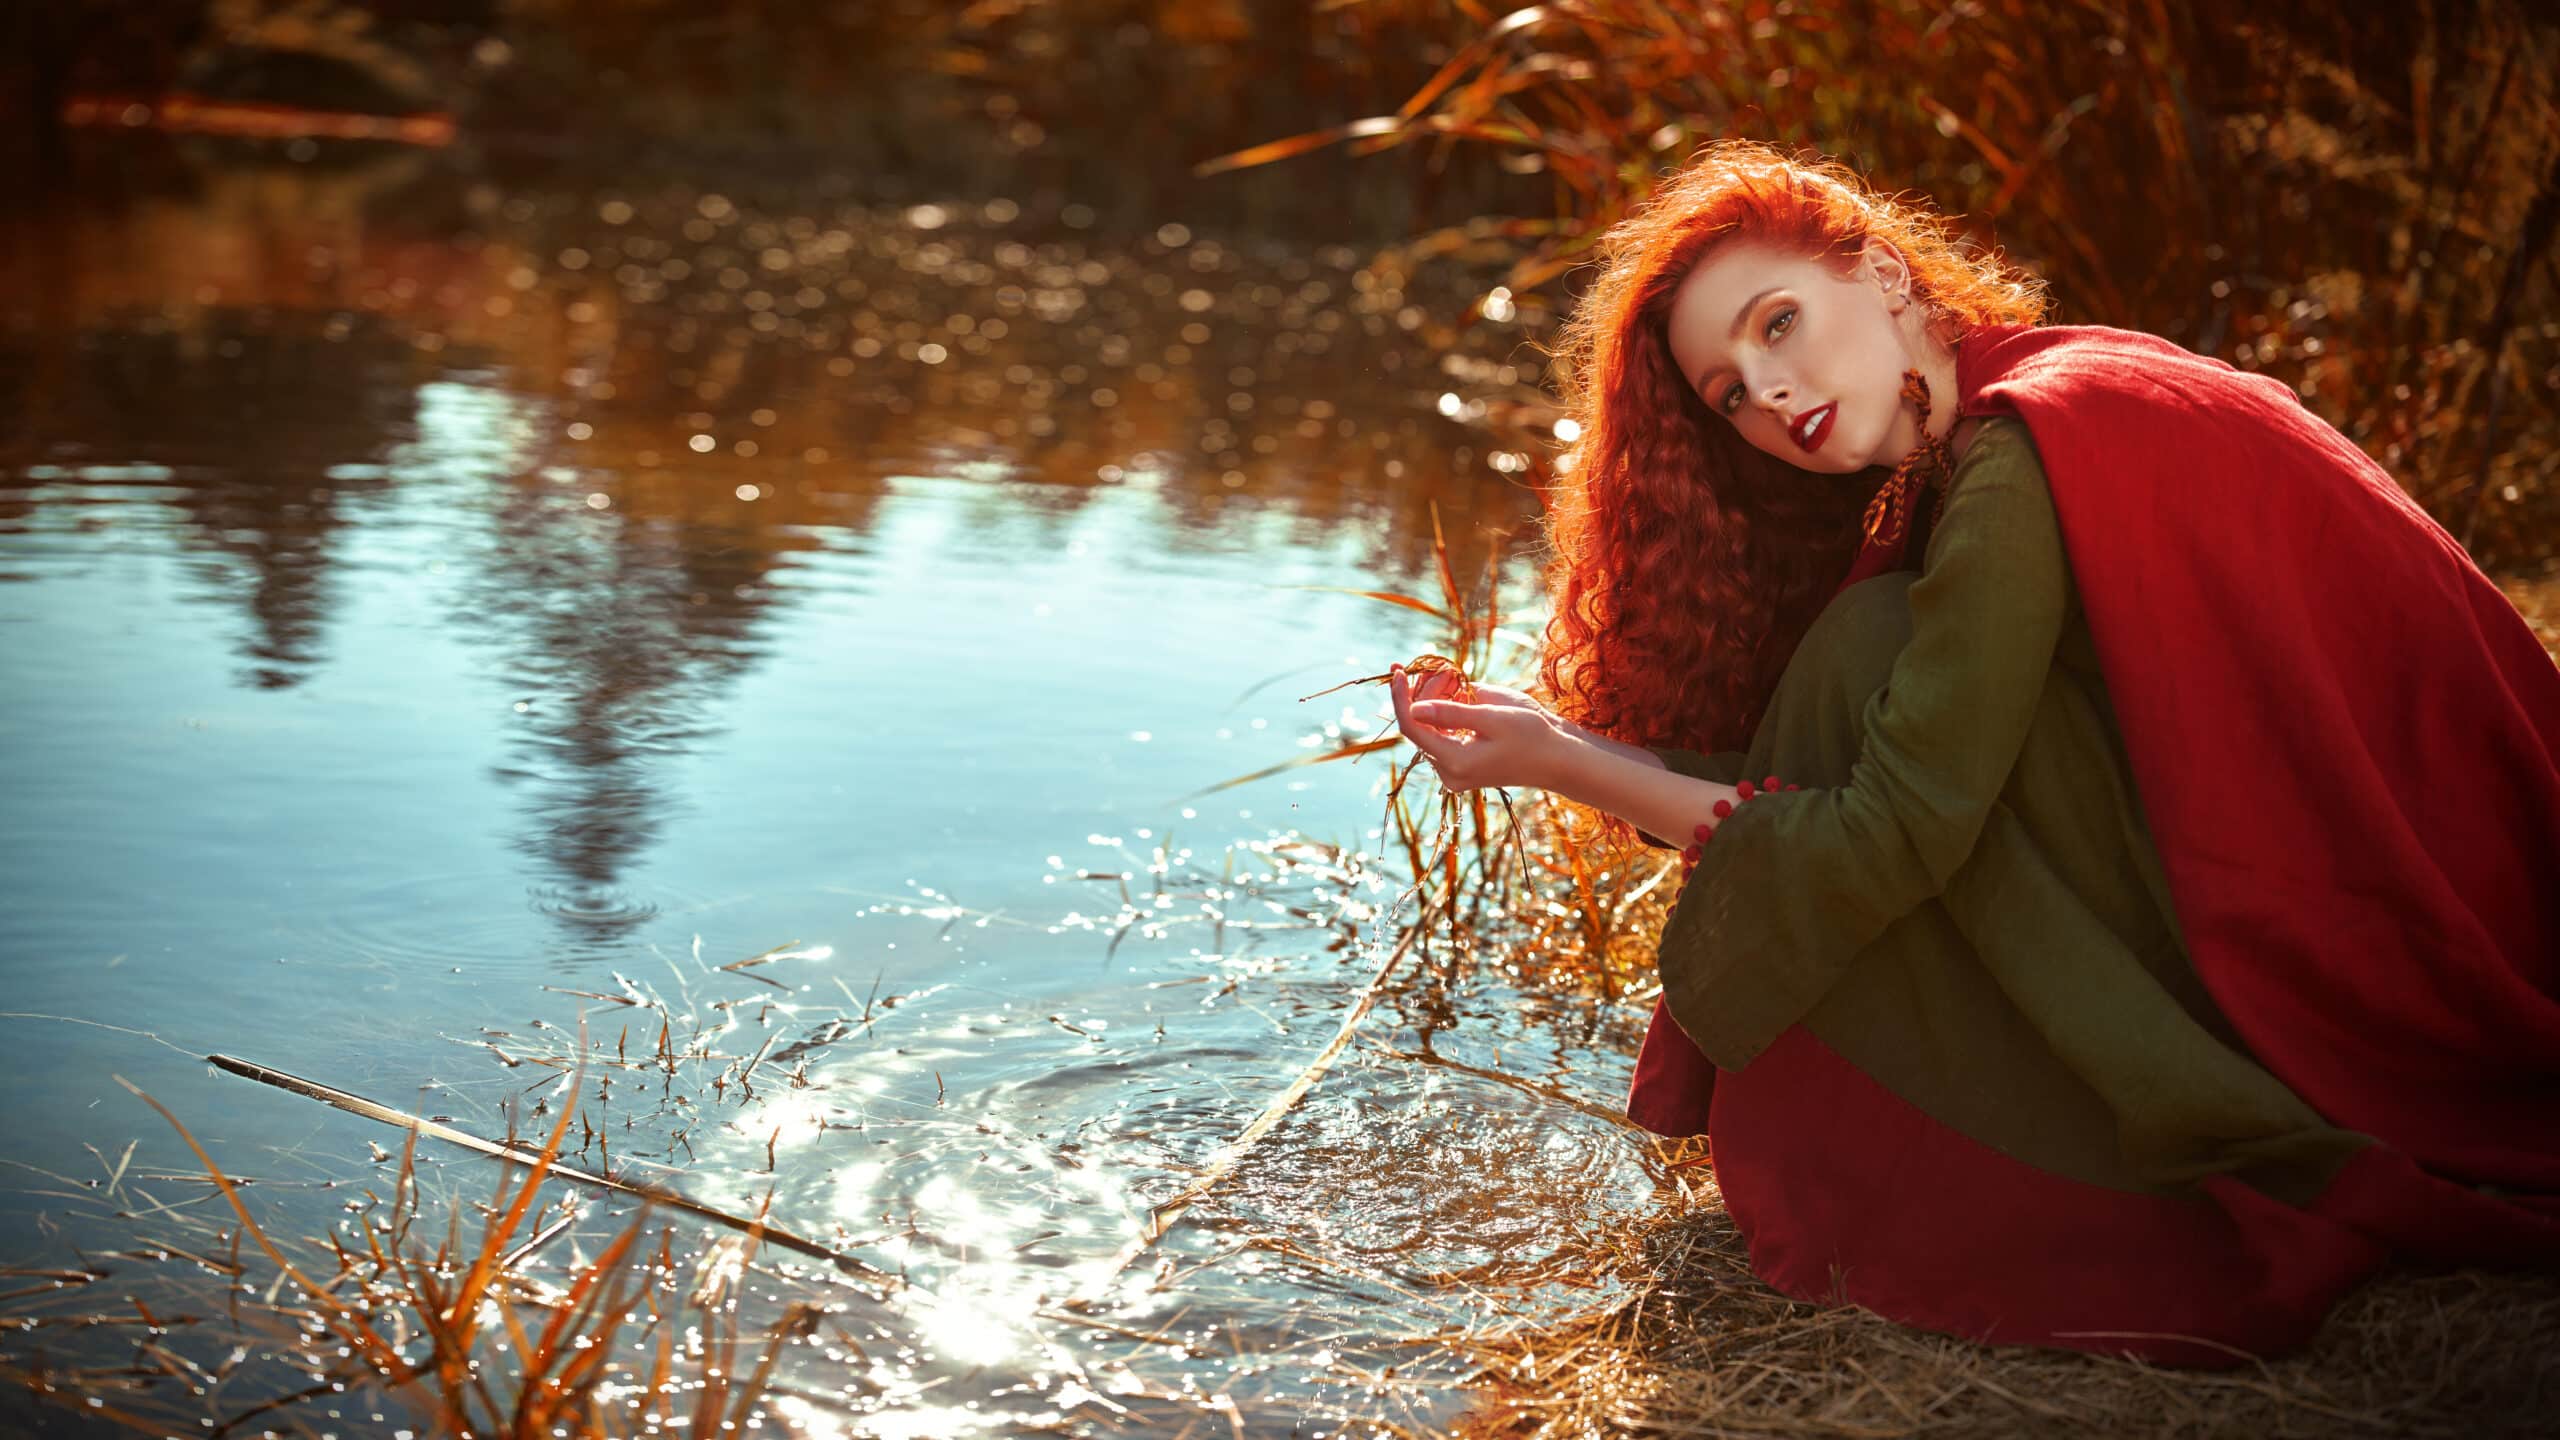 beautiful redhead dipping in the river, during the ancient celtic times